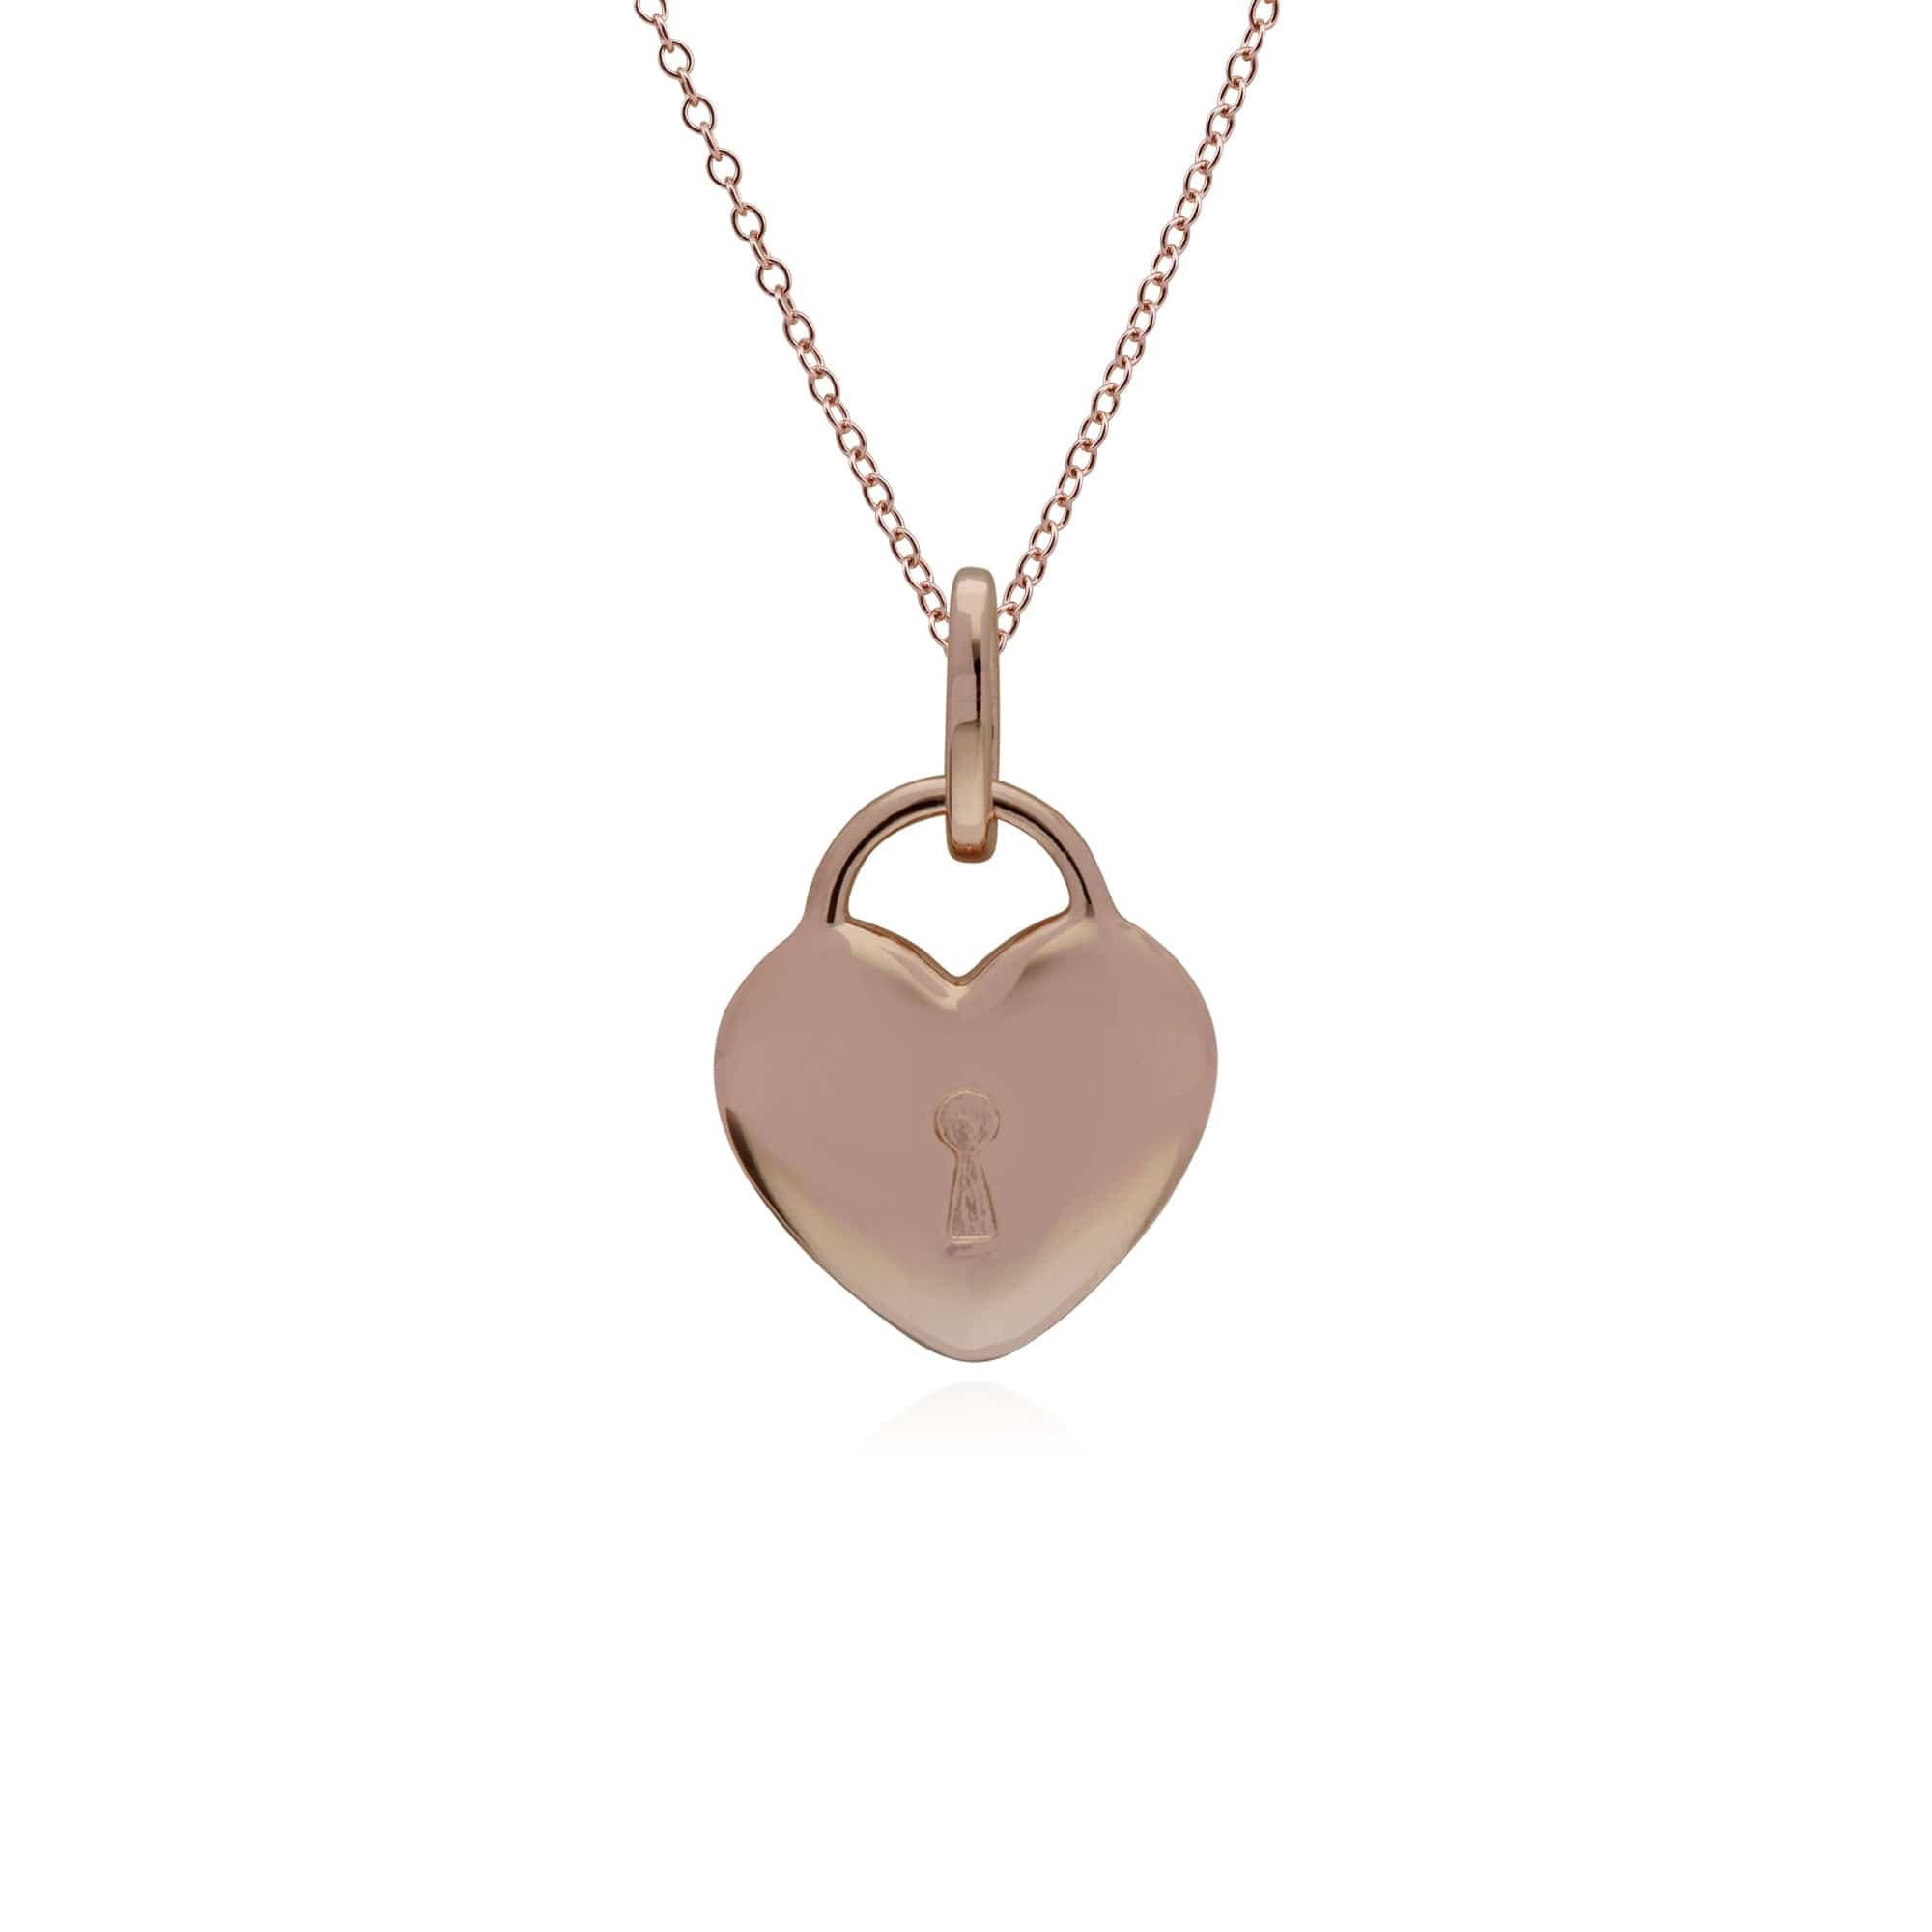 270P027303925-270P026901925 Classic Heart Lock Pendant & Blue Topaz Charm in Rose Gold Plated 925 Sterling Silver 3